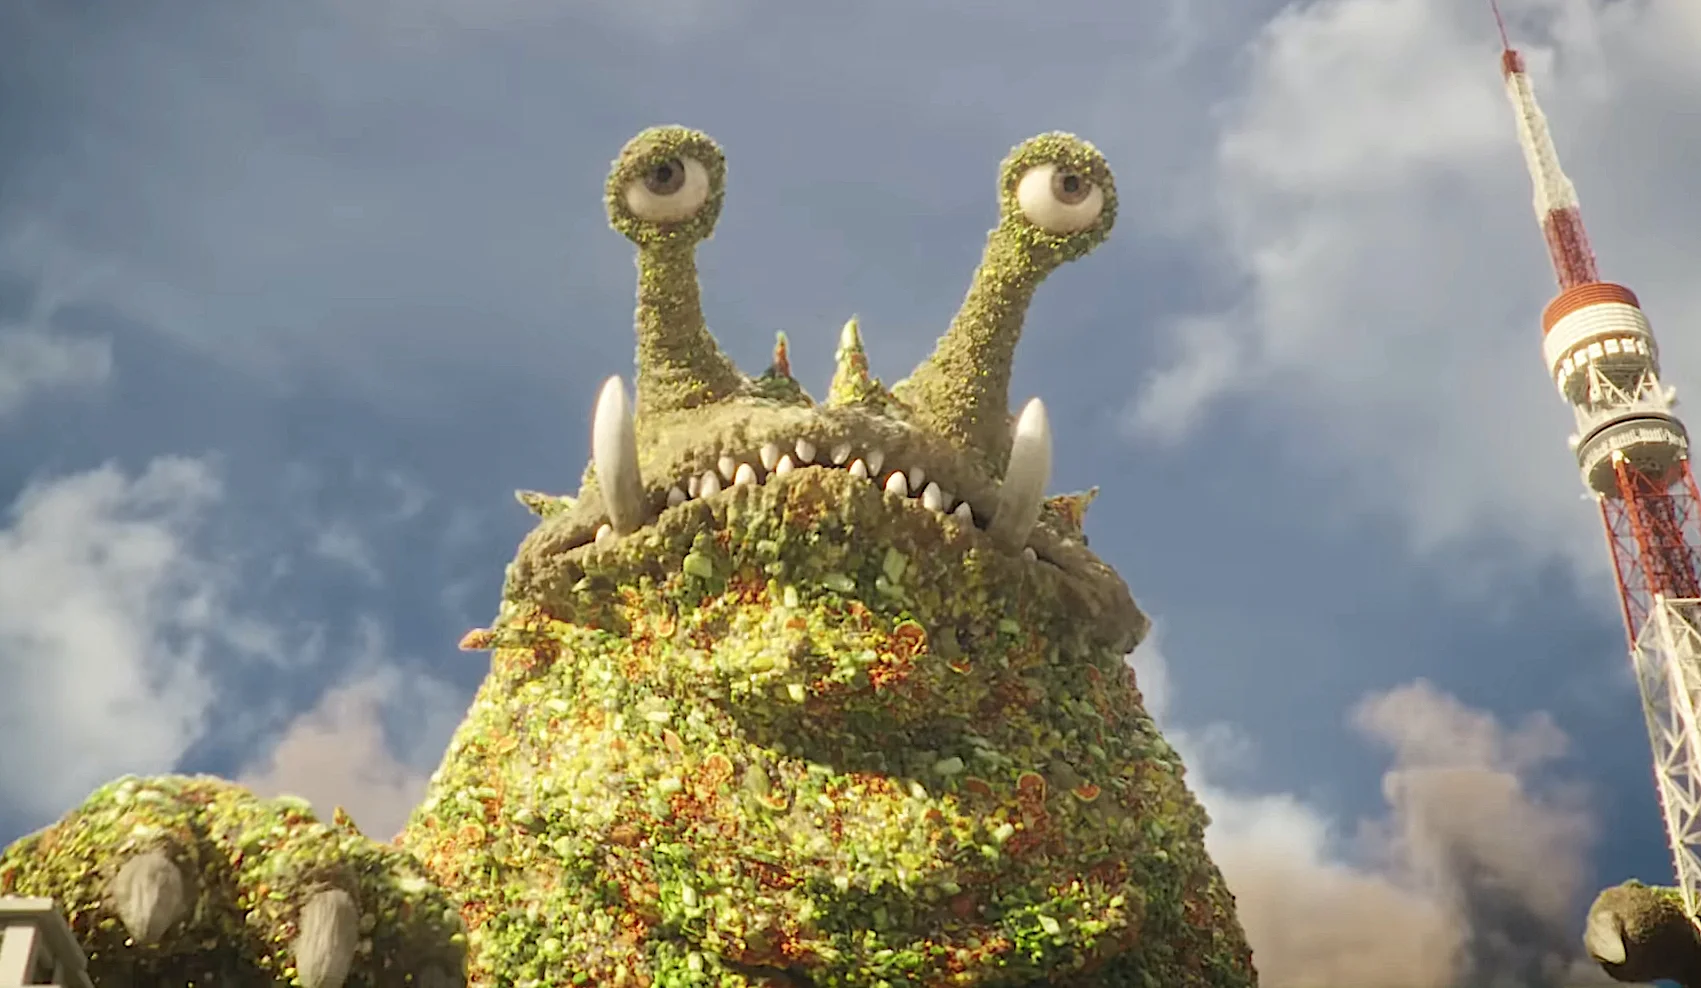 Giant moss-covered monster with multiple eyes near Tokyo Tower in a fantasy setting